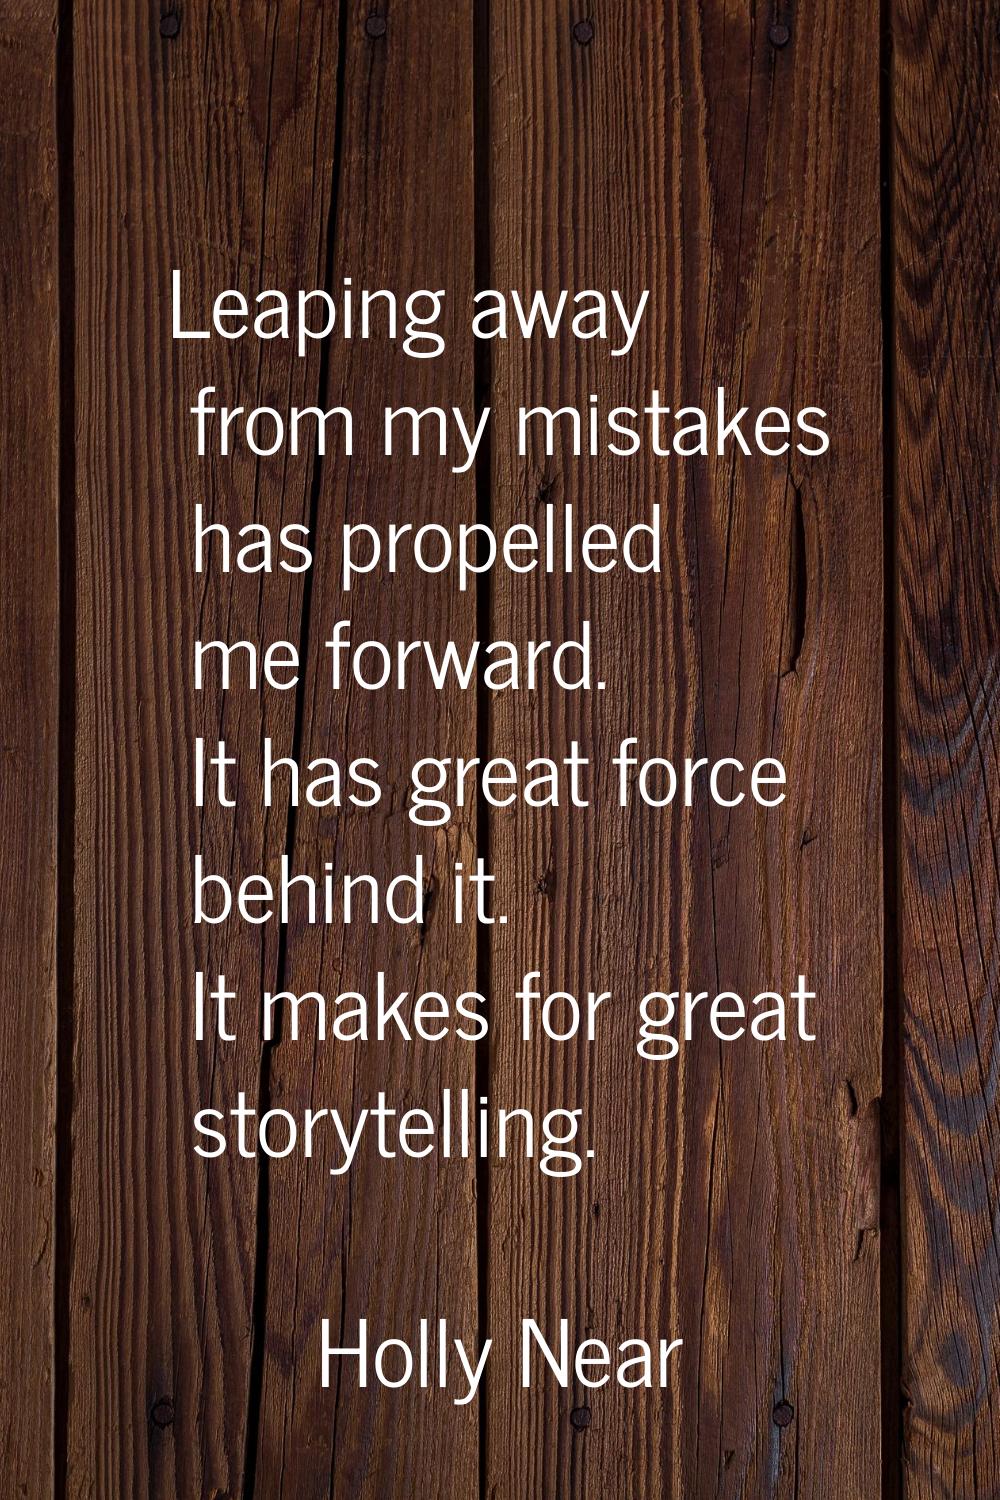 Leaping away from my mistakes has propelled me forward. It has great force behind it. It makes for 